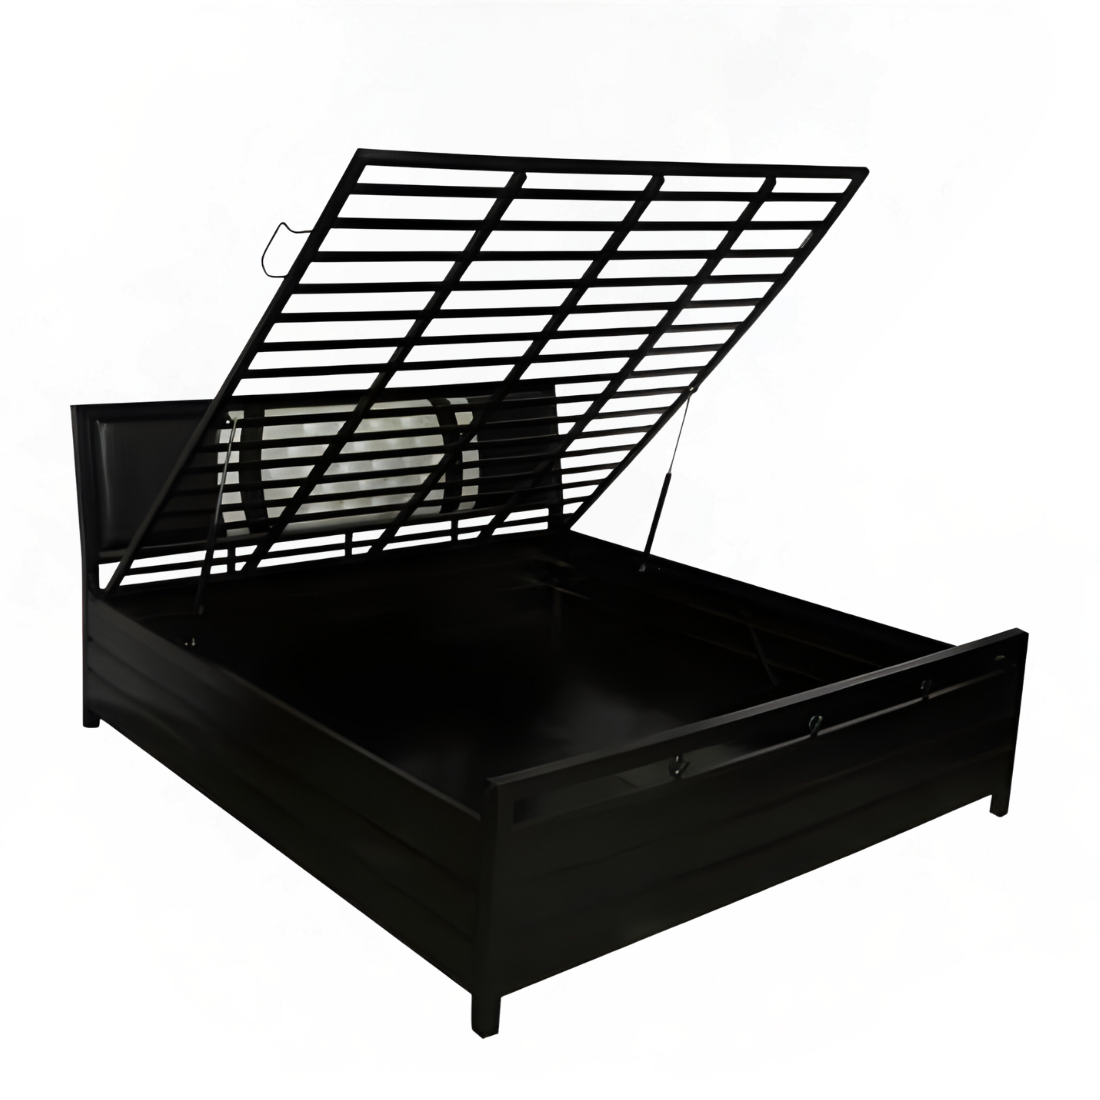 Heath Hydraulic Storage Double Metal Bed with Multi Cushion Headrest (Color - Black)